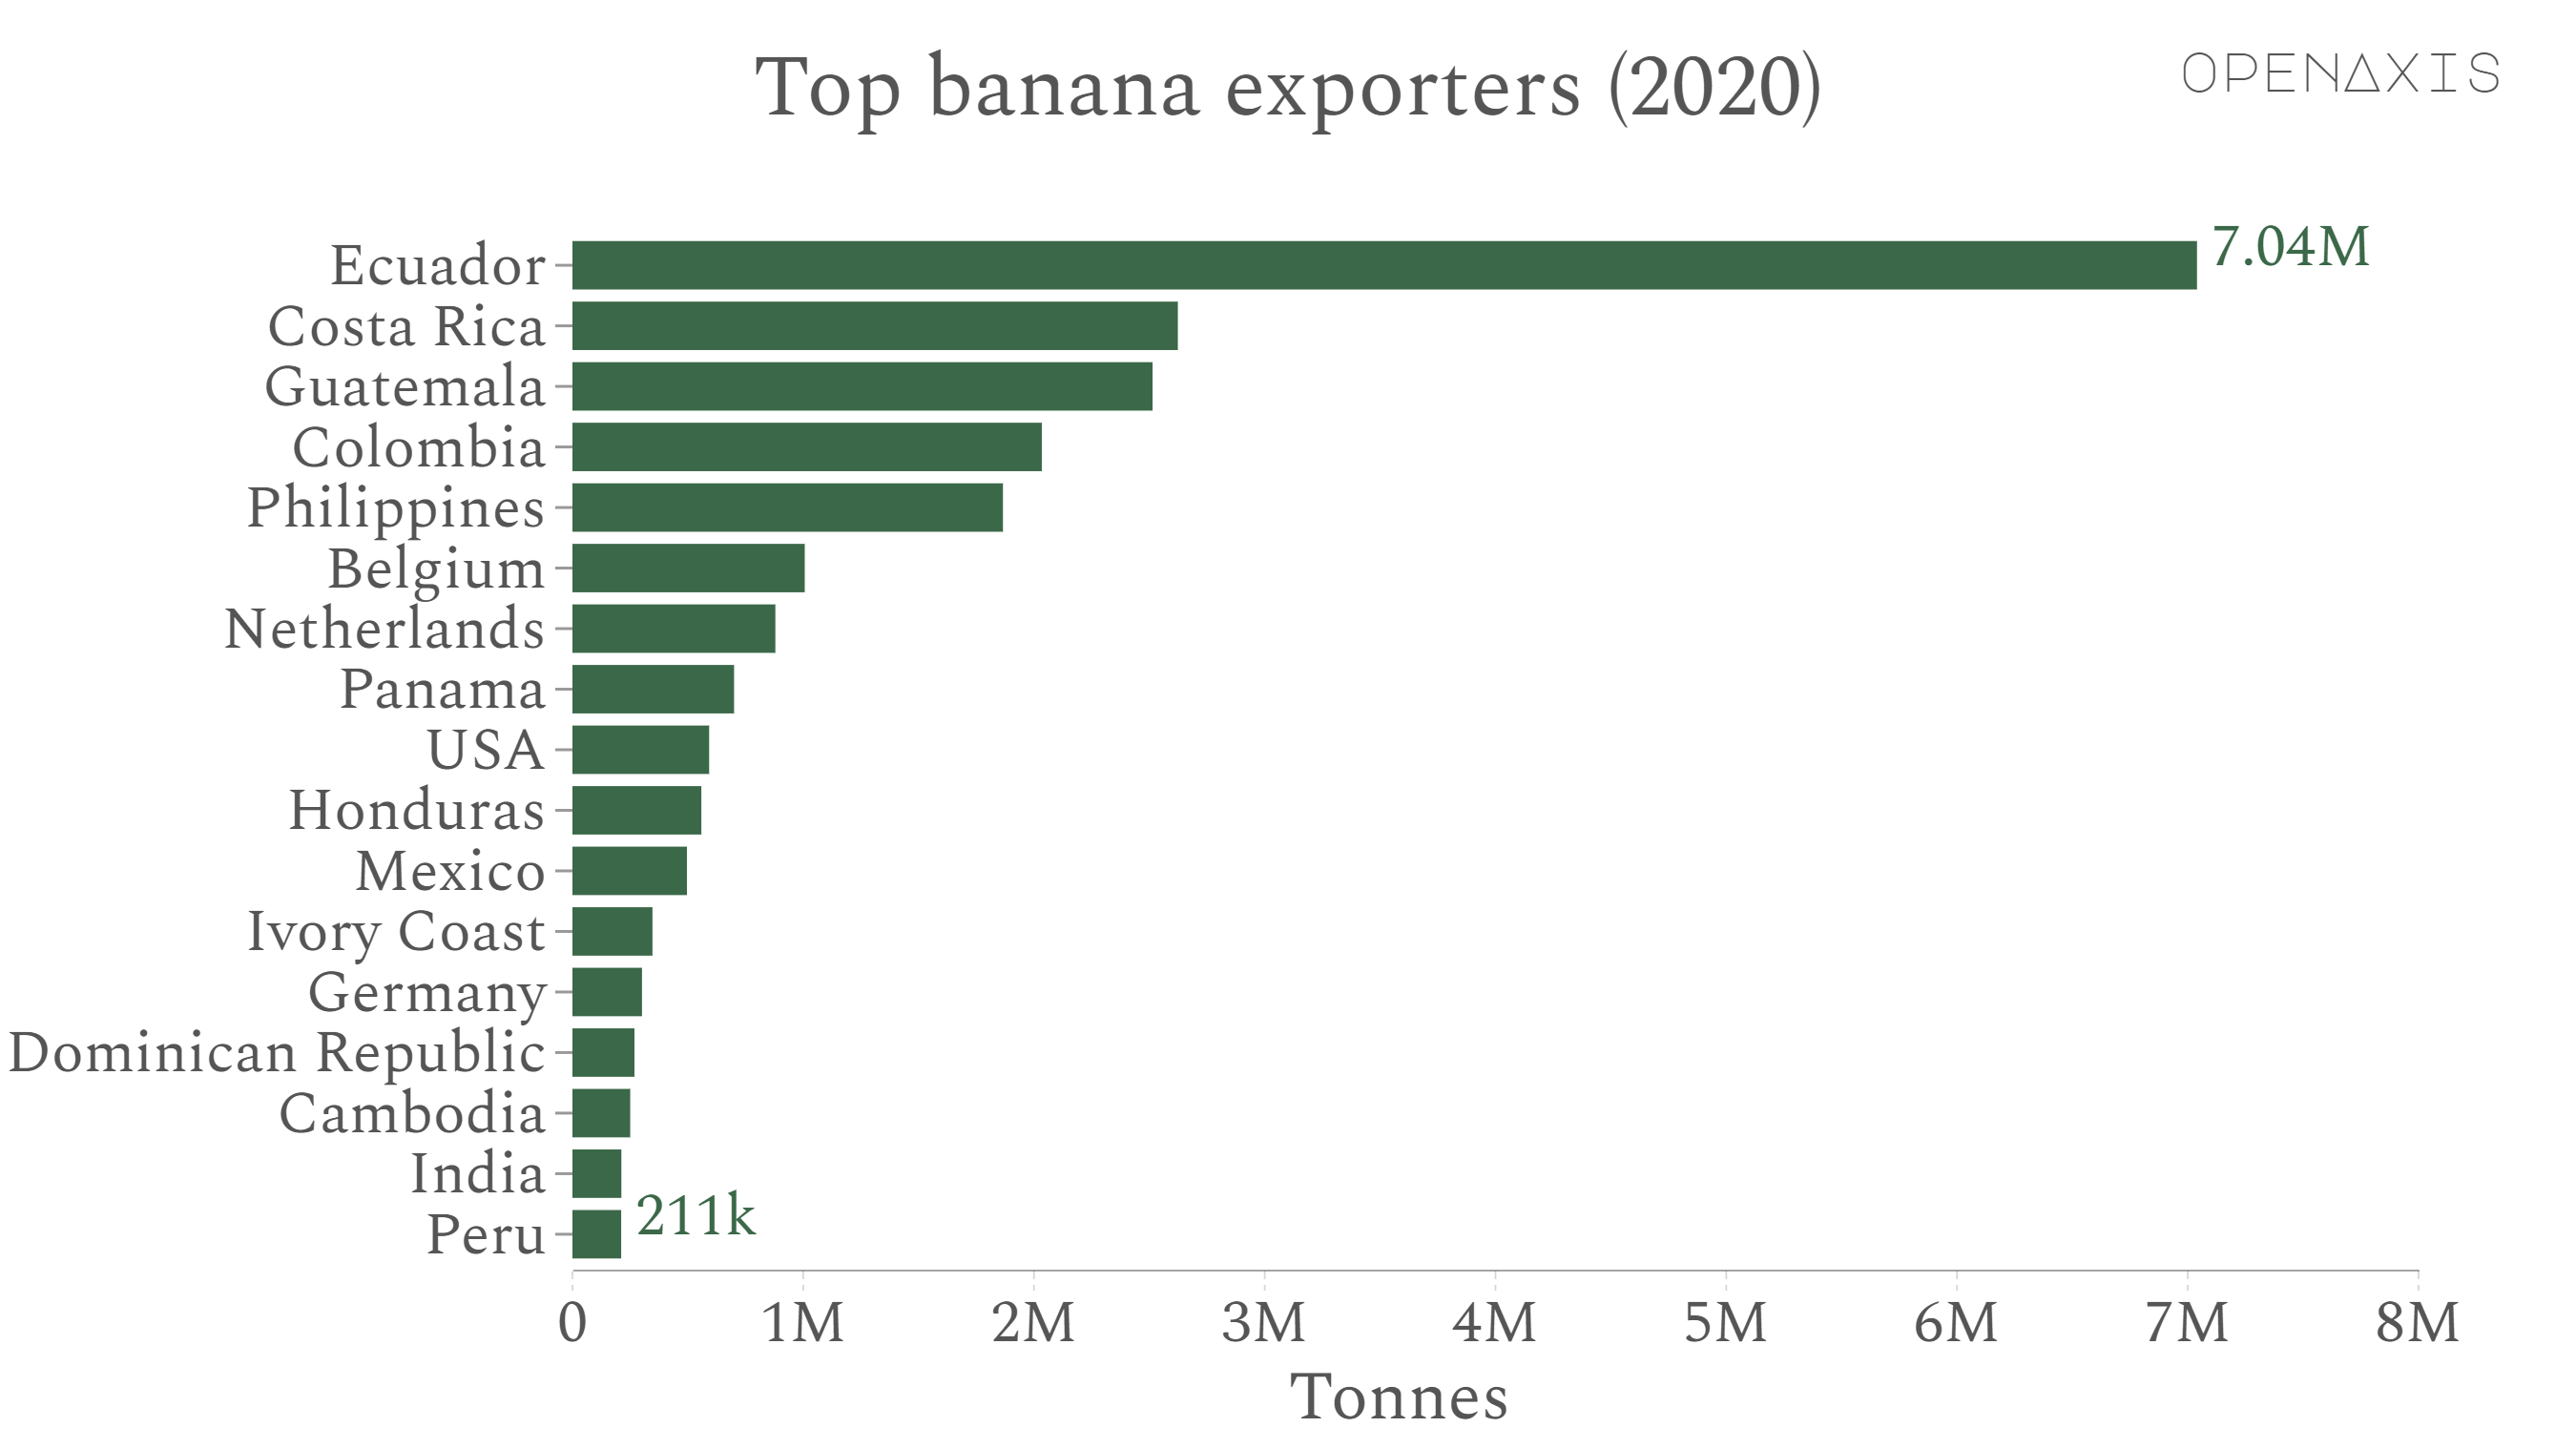 <p>In 2020, Bananas were the world's 240th most traded product, with a total trade of $13.9B. Between 2019 and 2020 the exports of Bananas grew by 0.76%, from $13.7B to $13.9B. Trade in Bananas represent 0.083% of total world trade.</p><p><br /></p><p>South and Central American countries tend to export the most bananas, with Ecuador in the top spot shipping 7 million tonnes in 2020.</p><p><br /></p><p><span data-index="0" data-denotation-char data-id="0" data-value="&lt;a href=&quot;/search?q=%23trade&quot; target=_self&gt;#trade" data-link="/search?q=%23trade">﻿<span contenteditable="false"><span></span><a href="/search?q=%23trade" target="_self">#trade</a></span>﻿</span> <span data-index="0" data-denotation-char data-id="0" data-value="&lt;a href=&quot;/search?q=%23commodities&quot; target=_self&gt;#commodities" data-link="/search?q=%23commodities">﻿<span contenteditable="false"><span></span><a href="/search?q=%23commodities" target="_self">#commodities</a></span>﻿</span></p><p><br /></p><p>Source: <a href="/data/3960" target="_blank">FAO</a></p><p><br /></p>